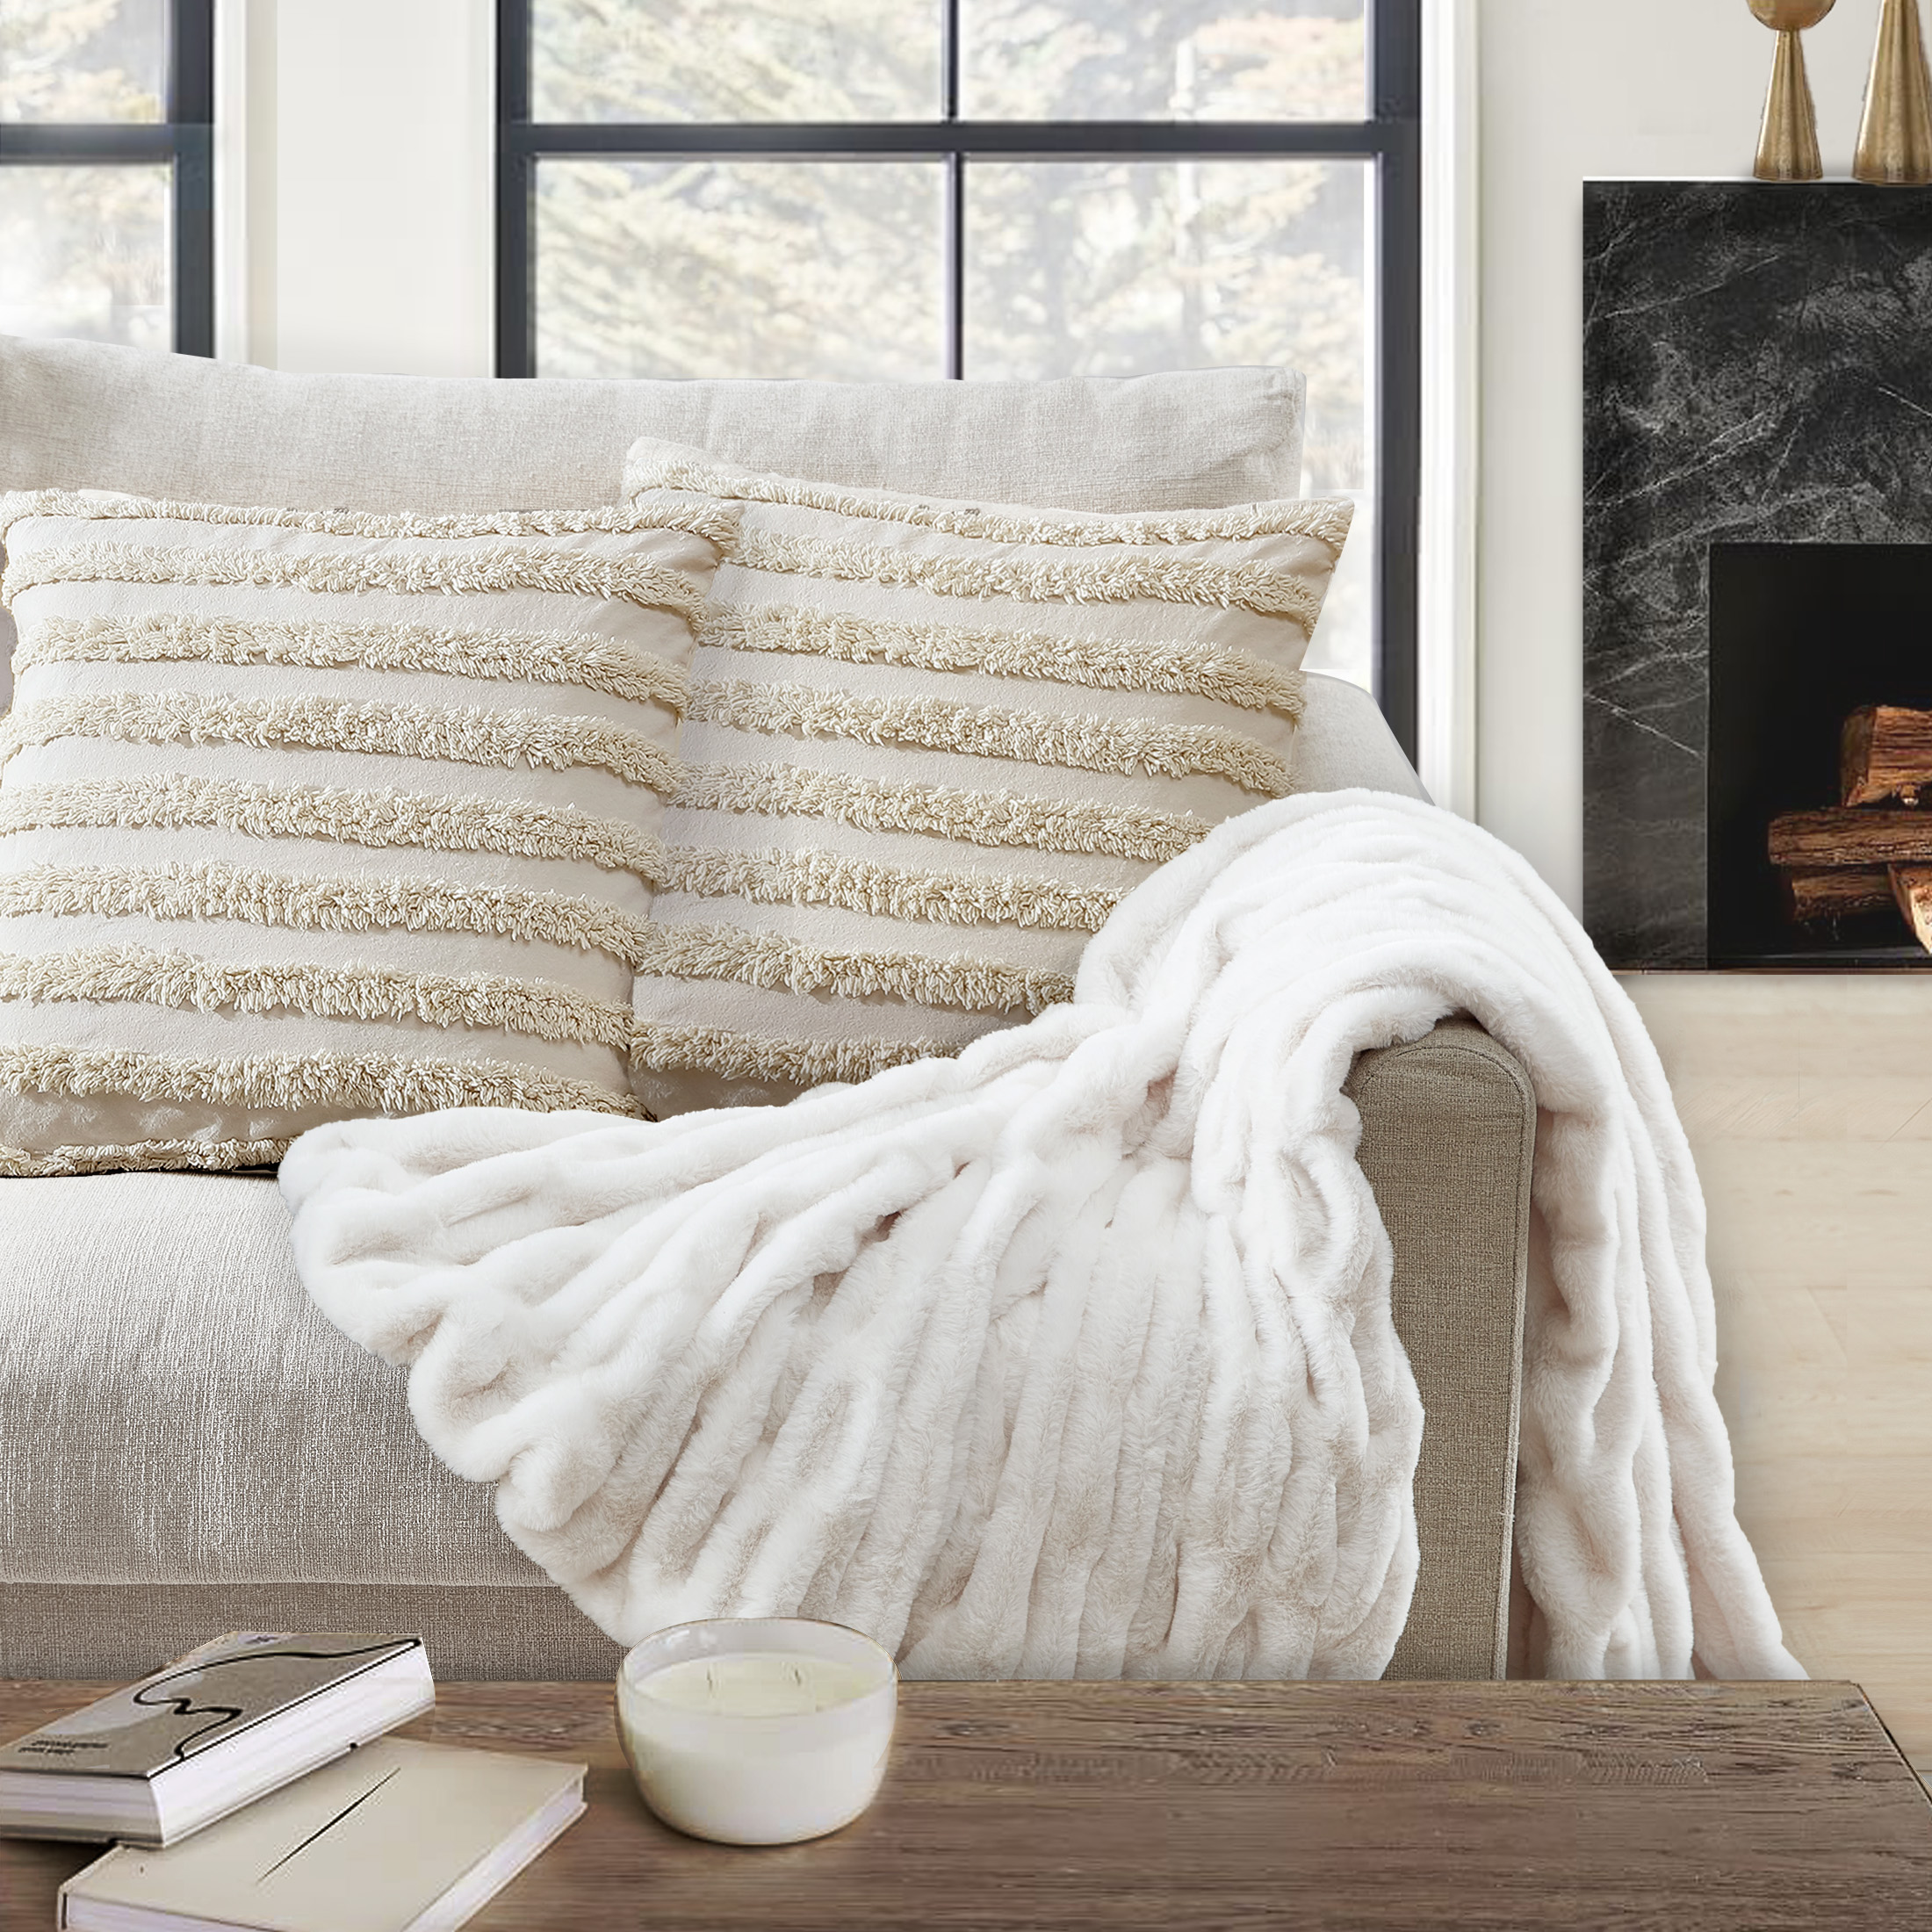 Better Homes & Gardens Ruched Faux Fur Throw Blanket, White, Standard Throw - image 3 of 6